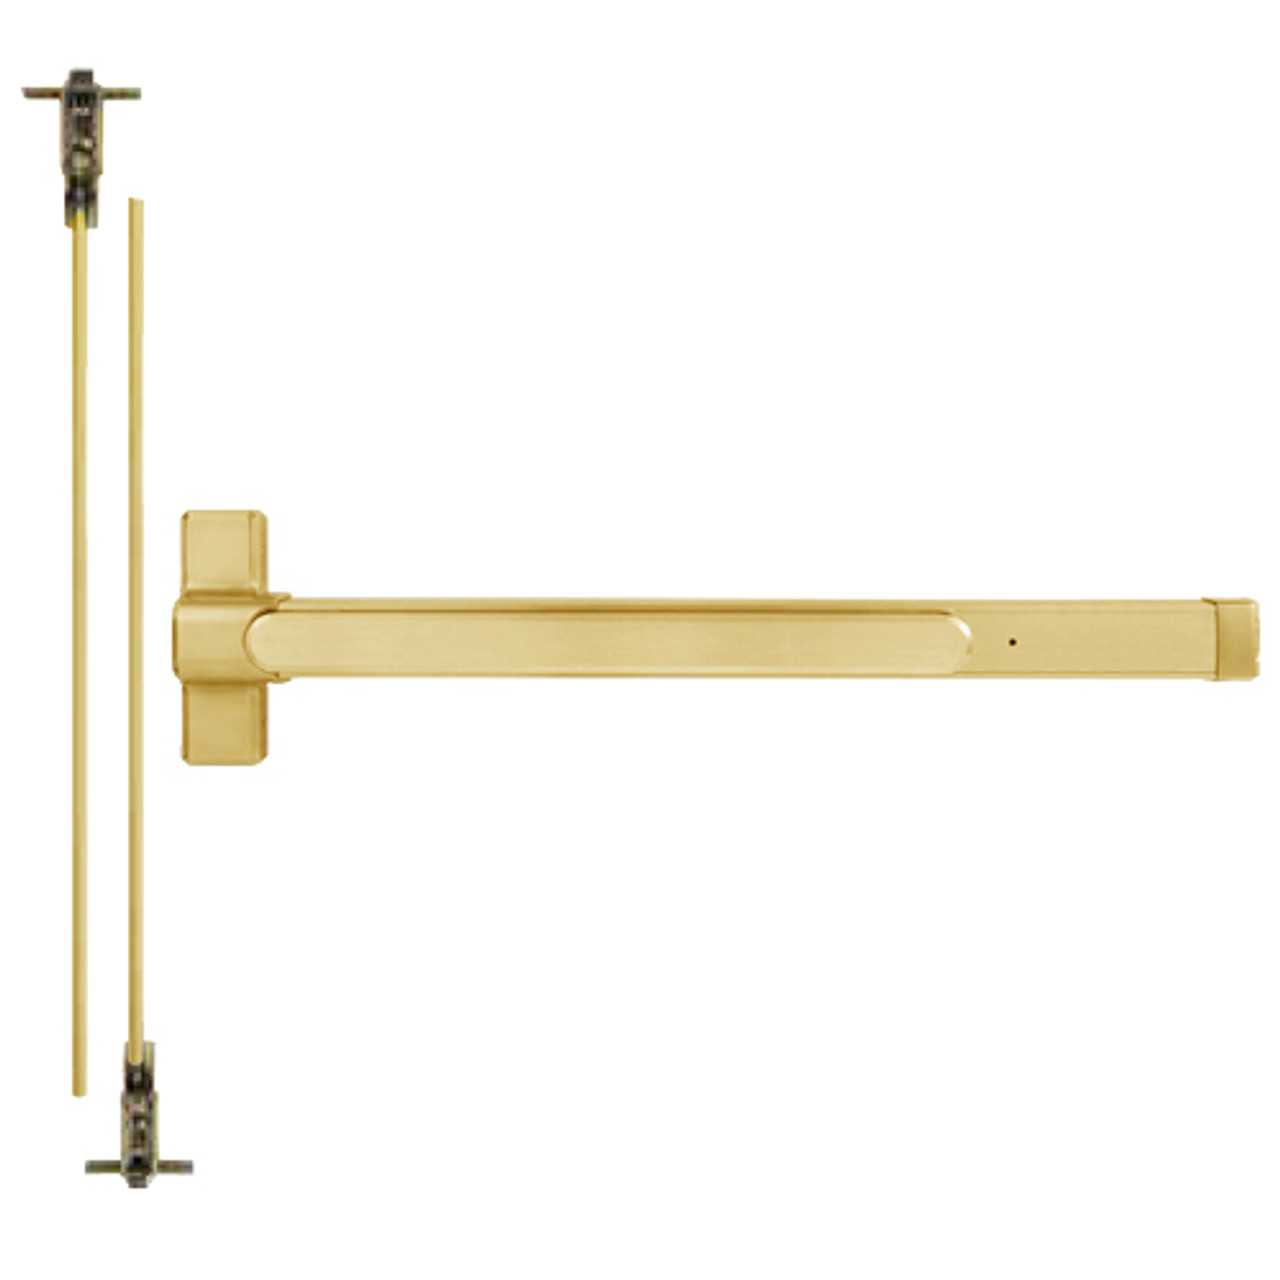 QED124X-48-8-605 Stanley QED100 Series Heavy Duty Concealed Vertical Rod Hex Dog Exit Device in Bright Brass Finish